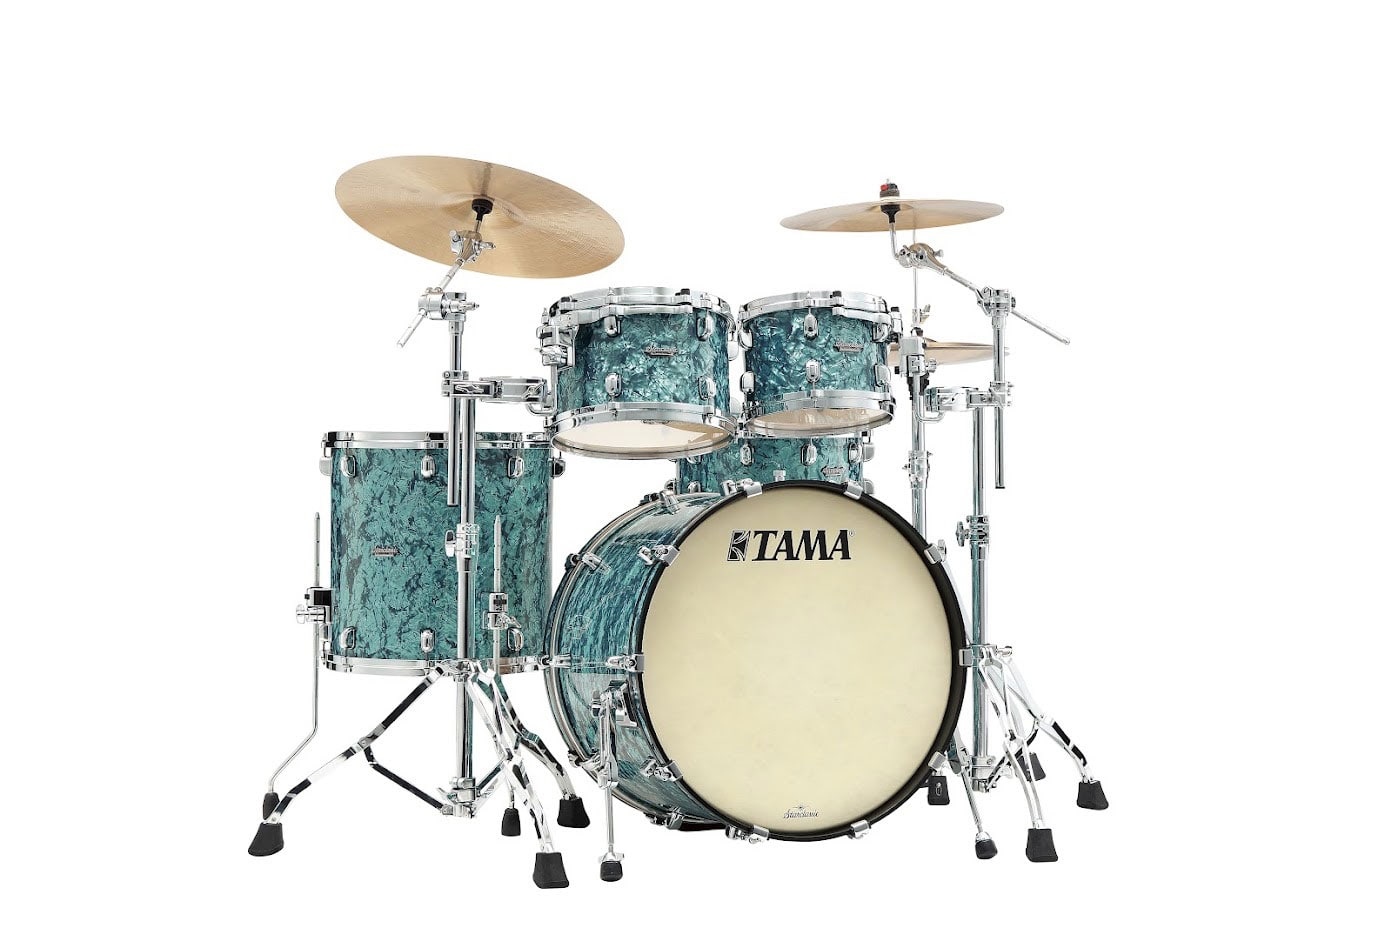 TAMA STARCLASSIC MAPLE STAGE 22 DRUM KIT, CHROME SHELL HARDWARE TURQUOISE PEARL